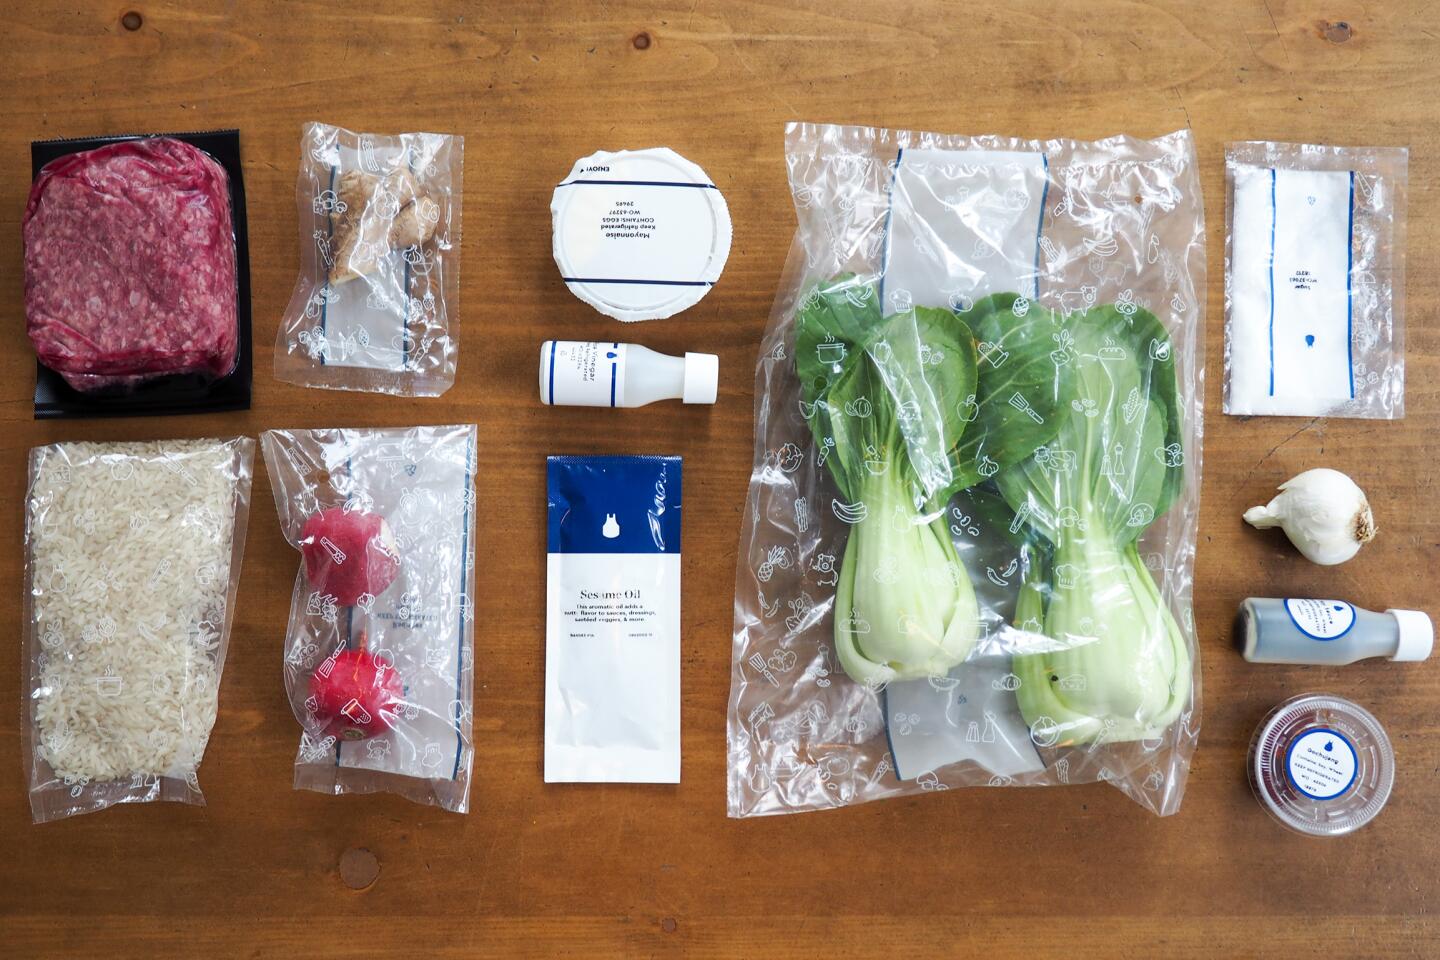 Ingredients for the Blue Apron savory beef and rice bowl with bok choy and spicy mayo.